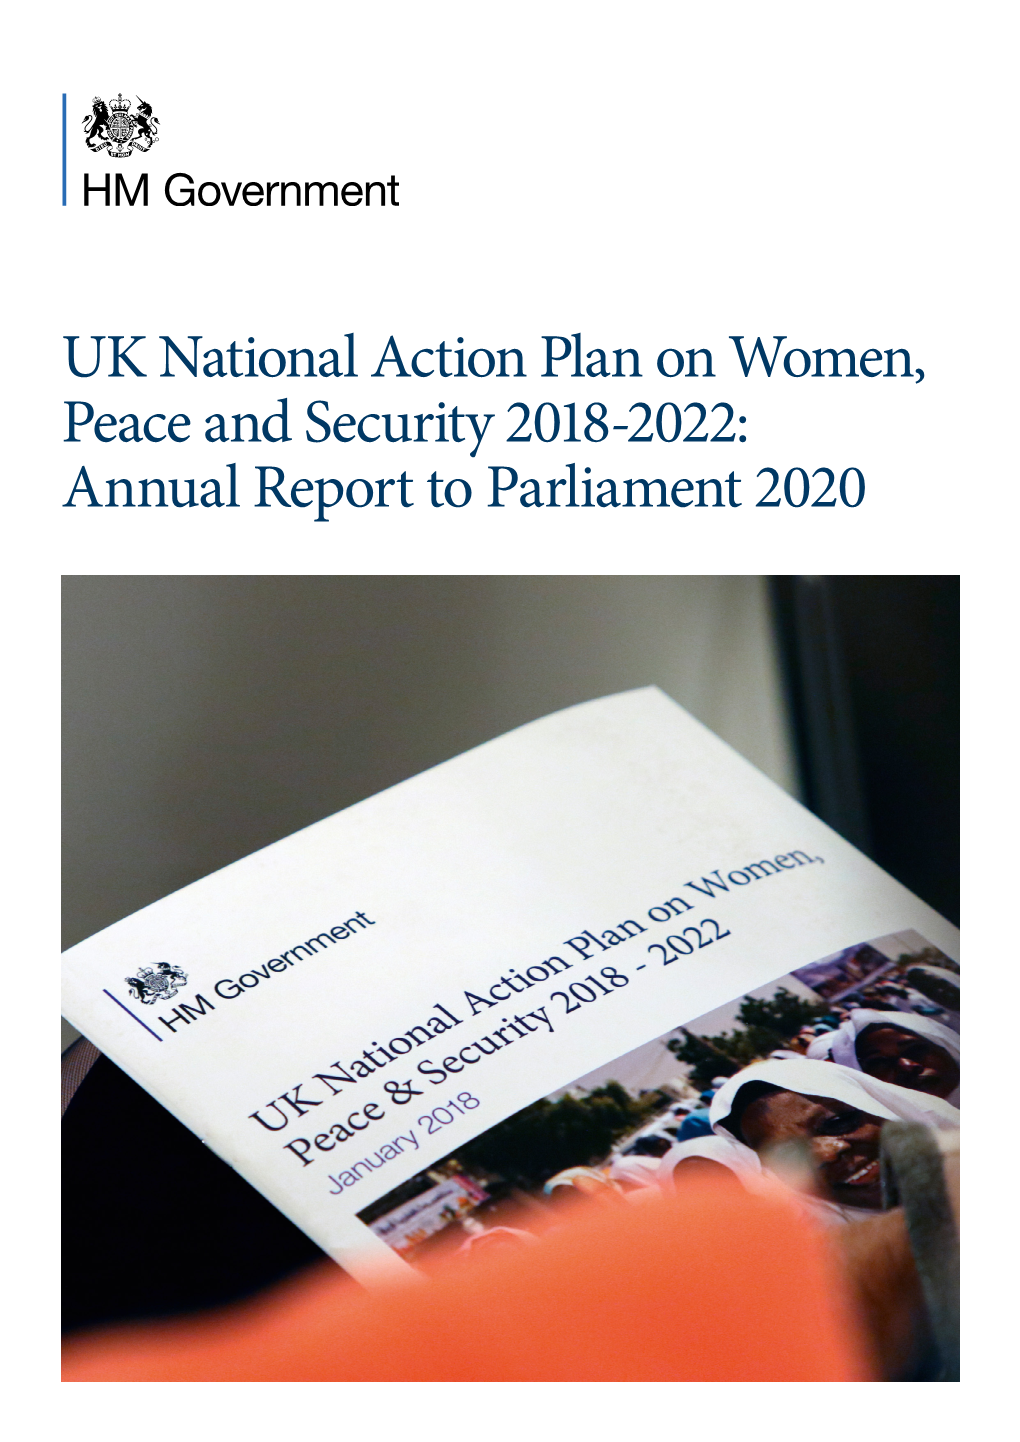 UK National Action Plan on Women, Peace and Security 2018-2022